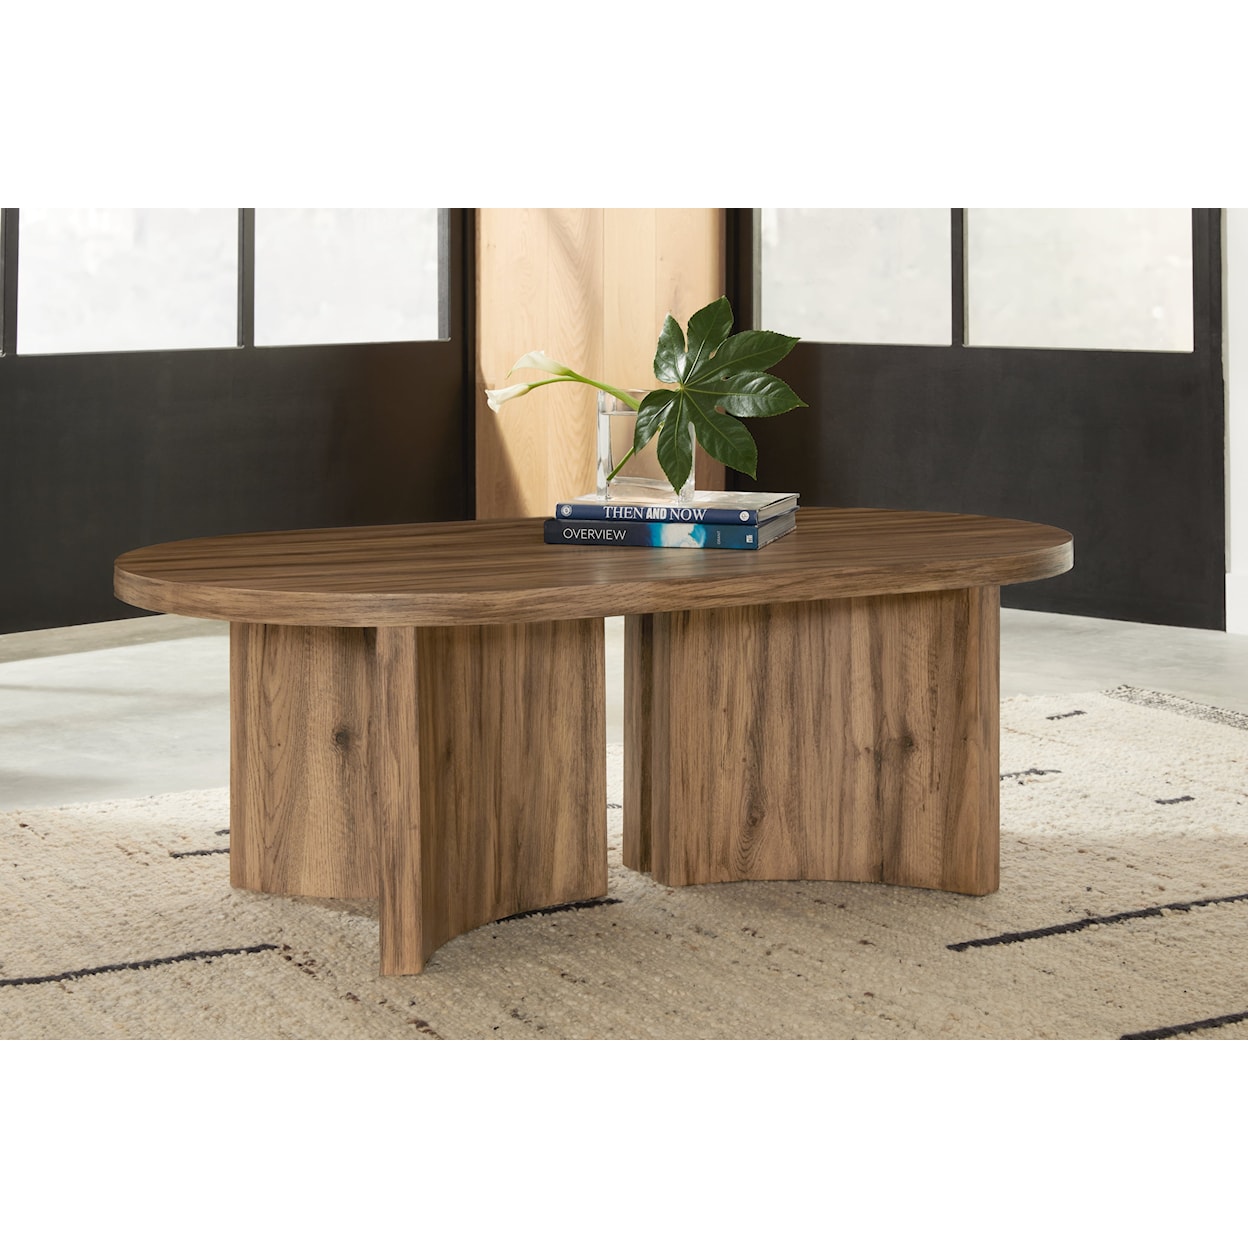 Benchcraft Austanny Coffee Table and 2 End Tables